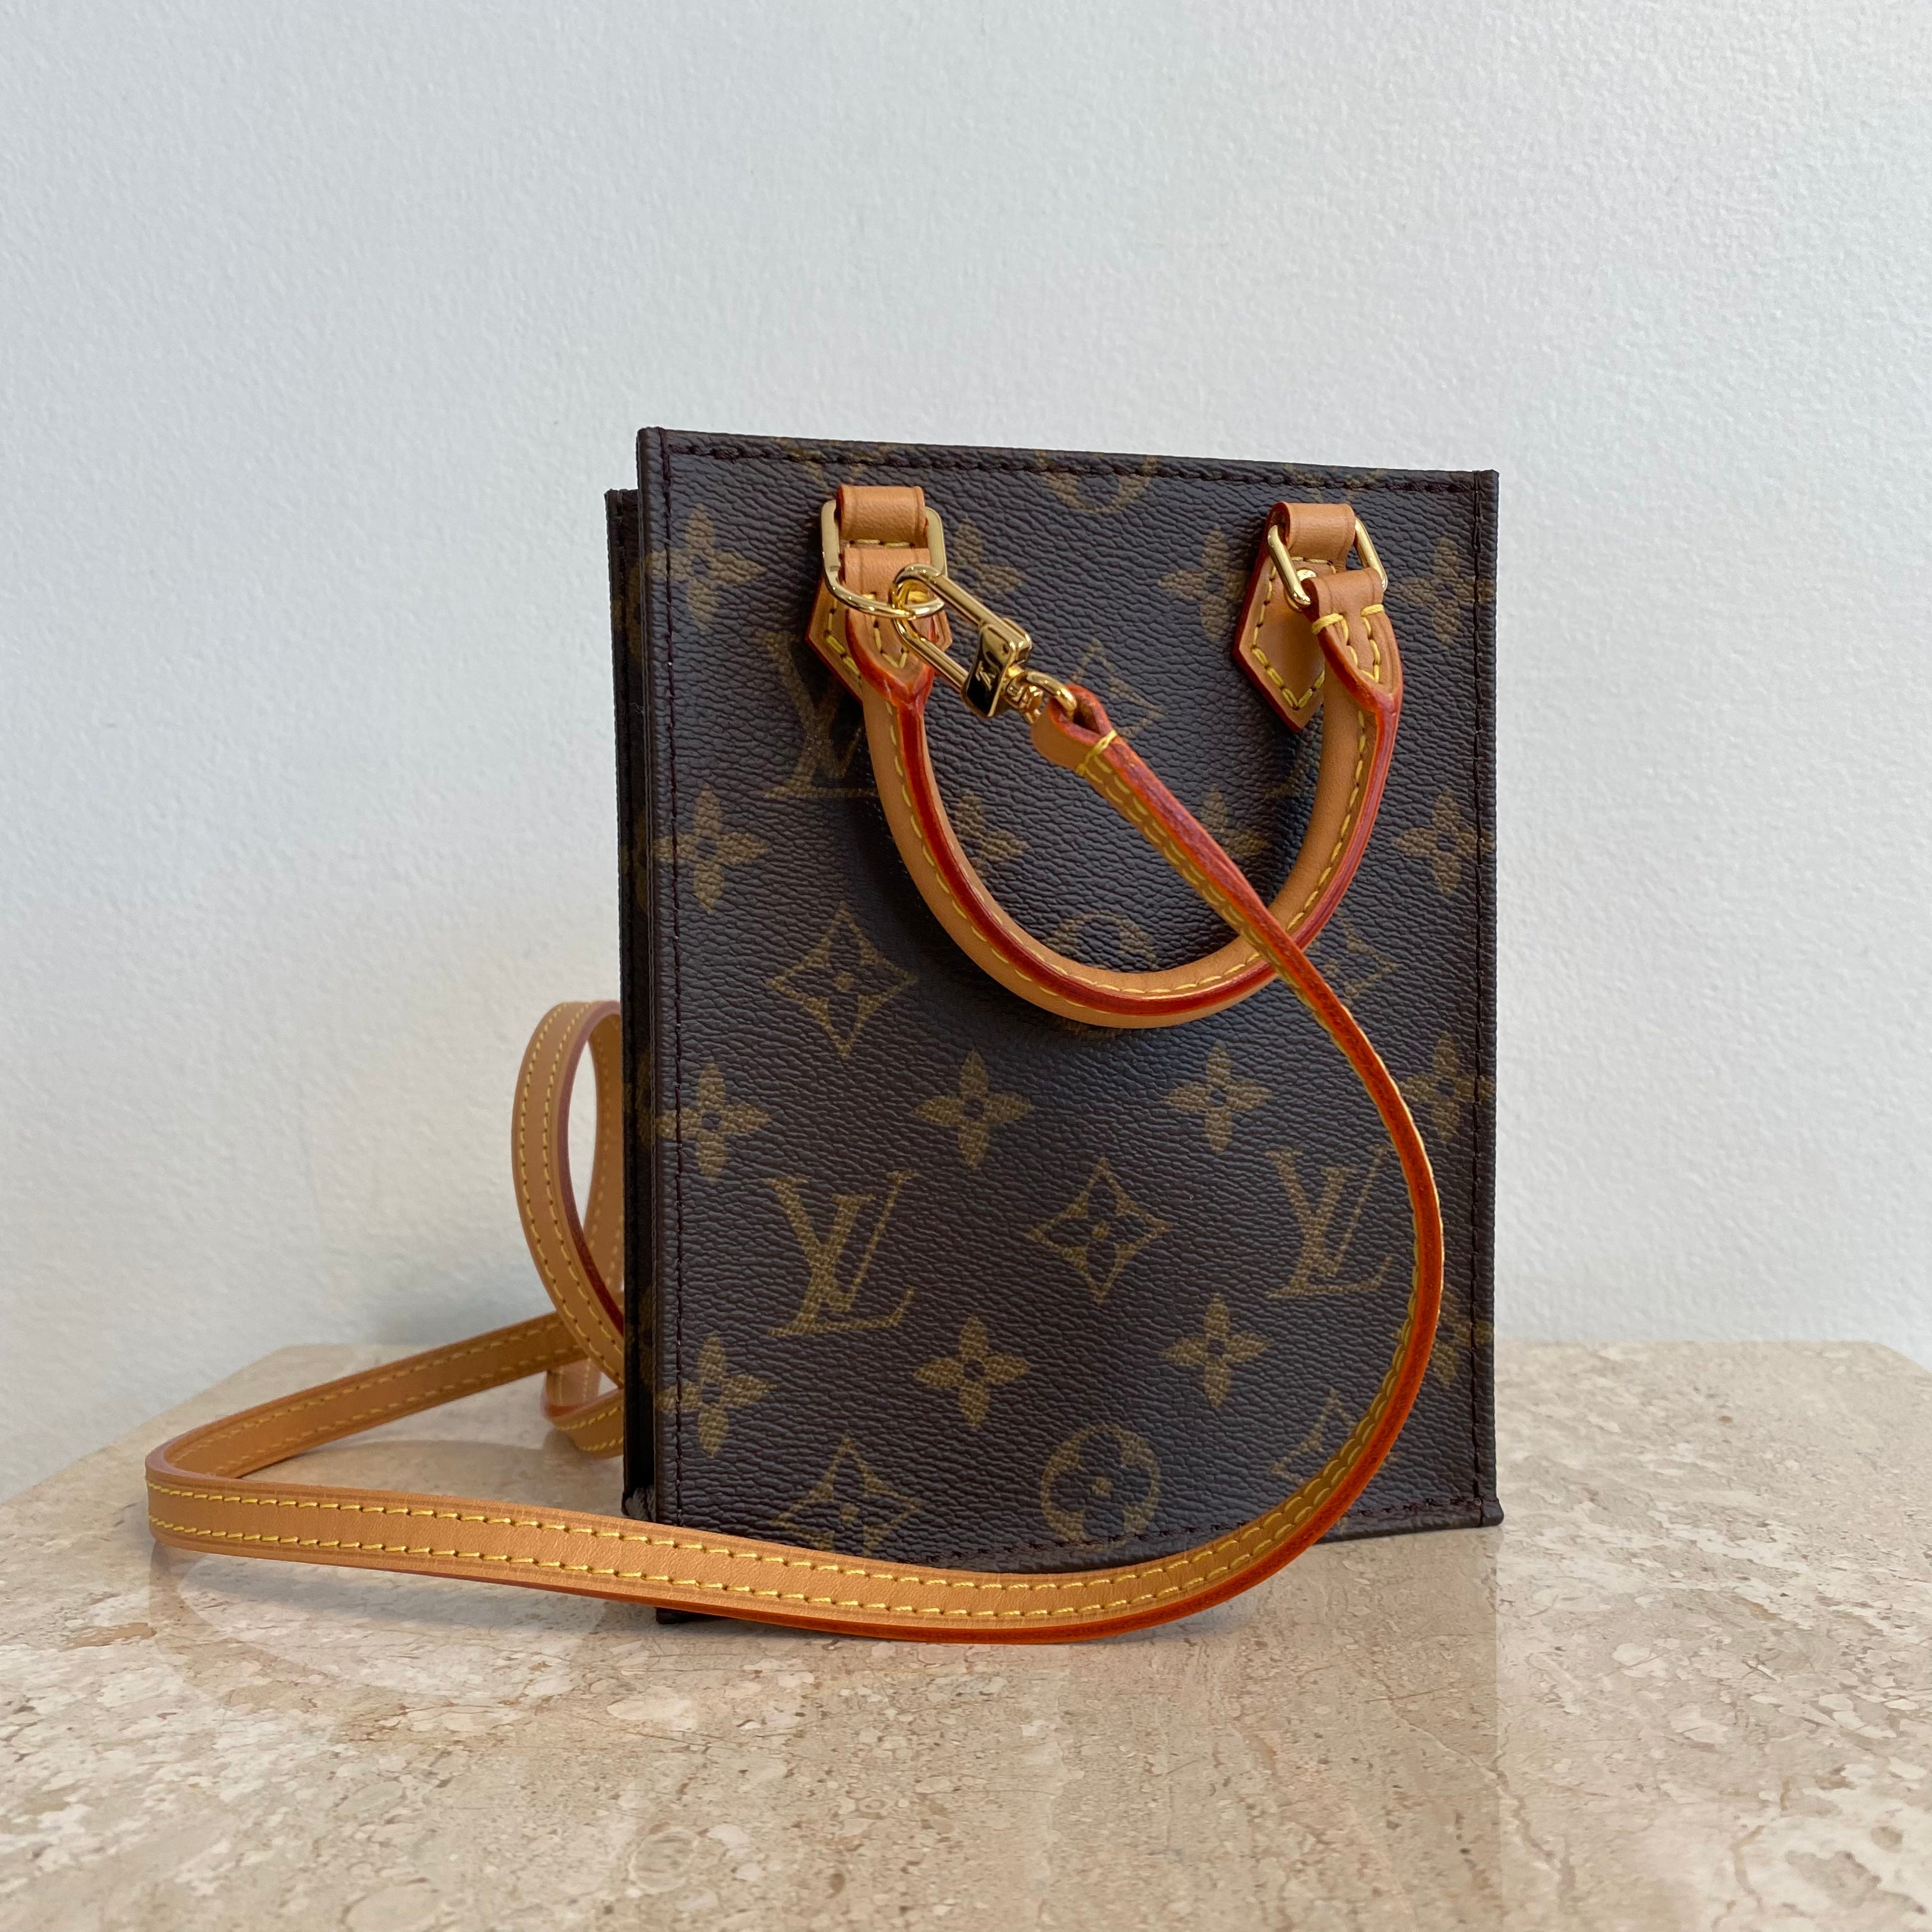 Louis Vuitton Petit Sac Plat By The Pool CollectionLimited Edition  eBay